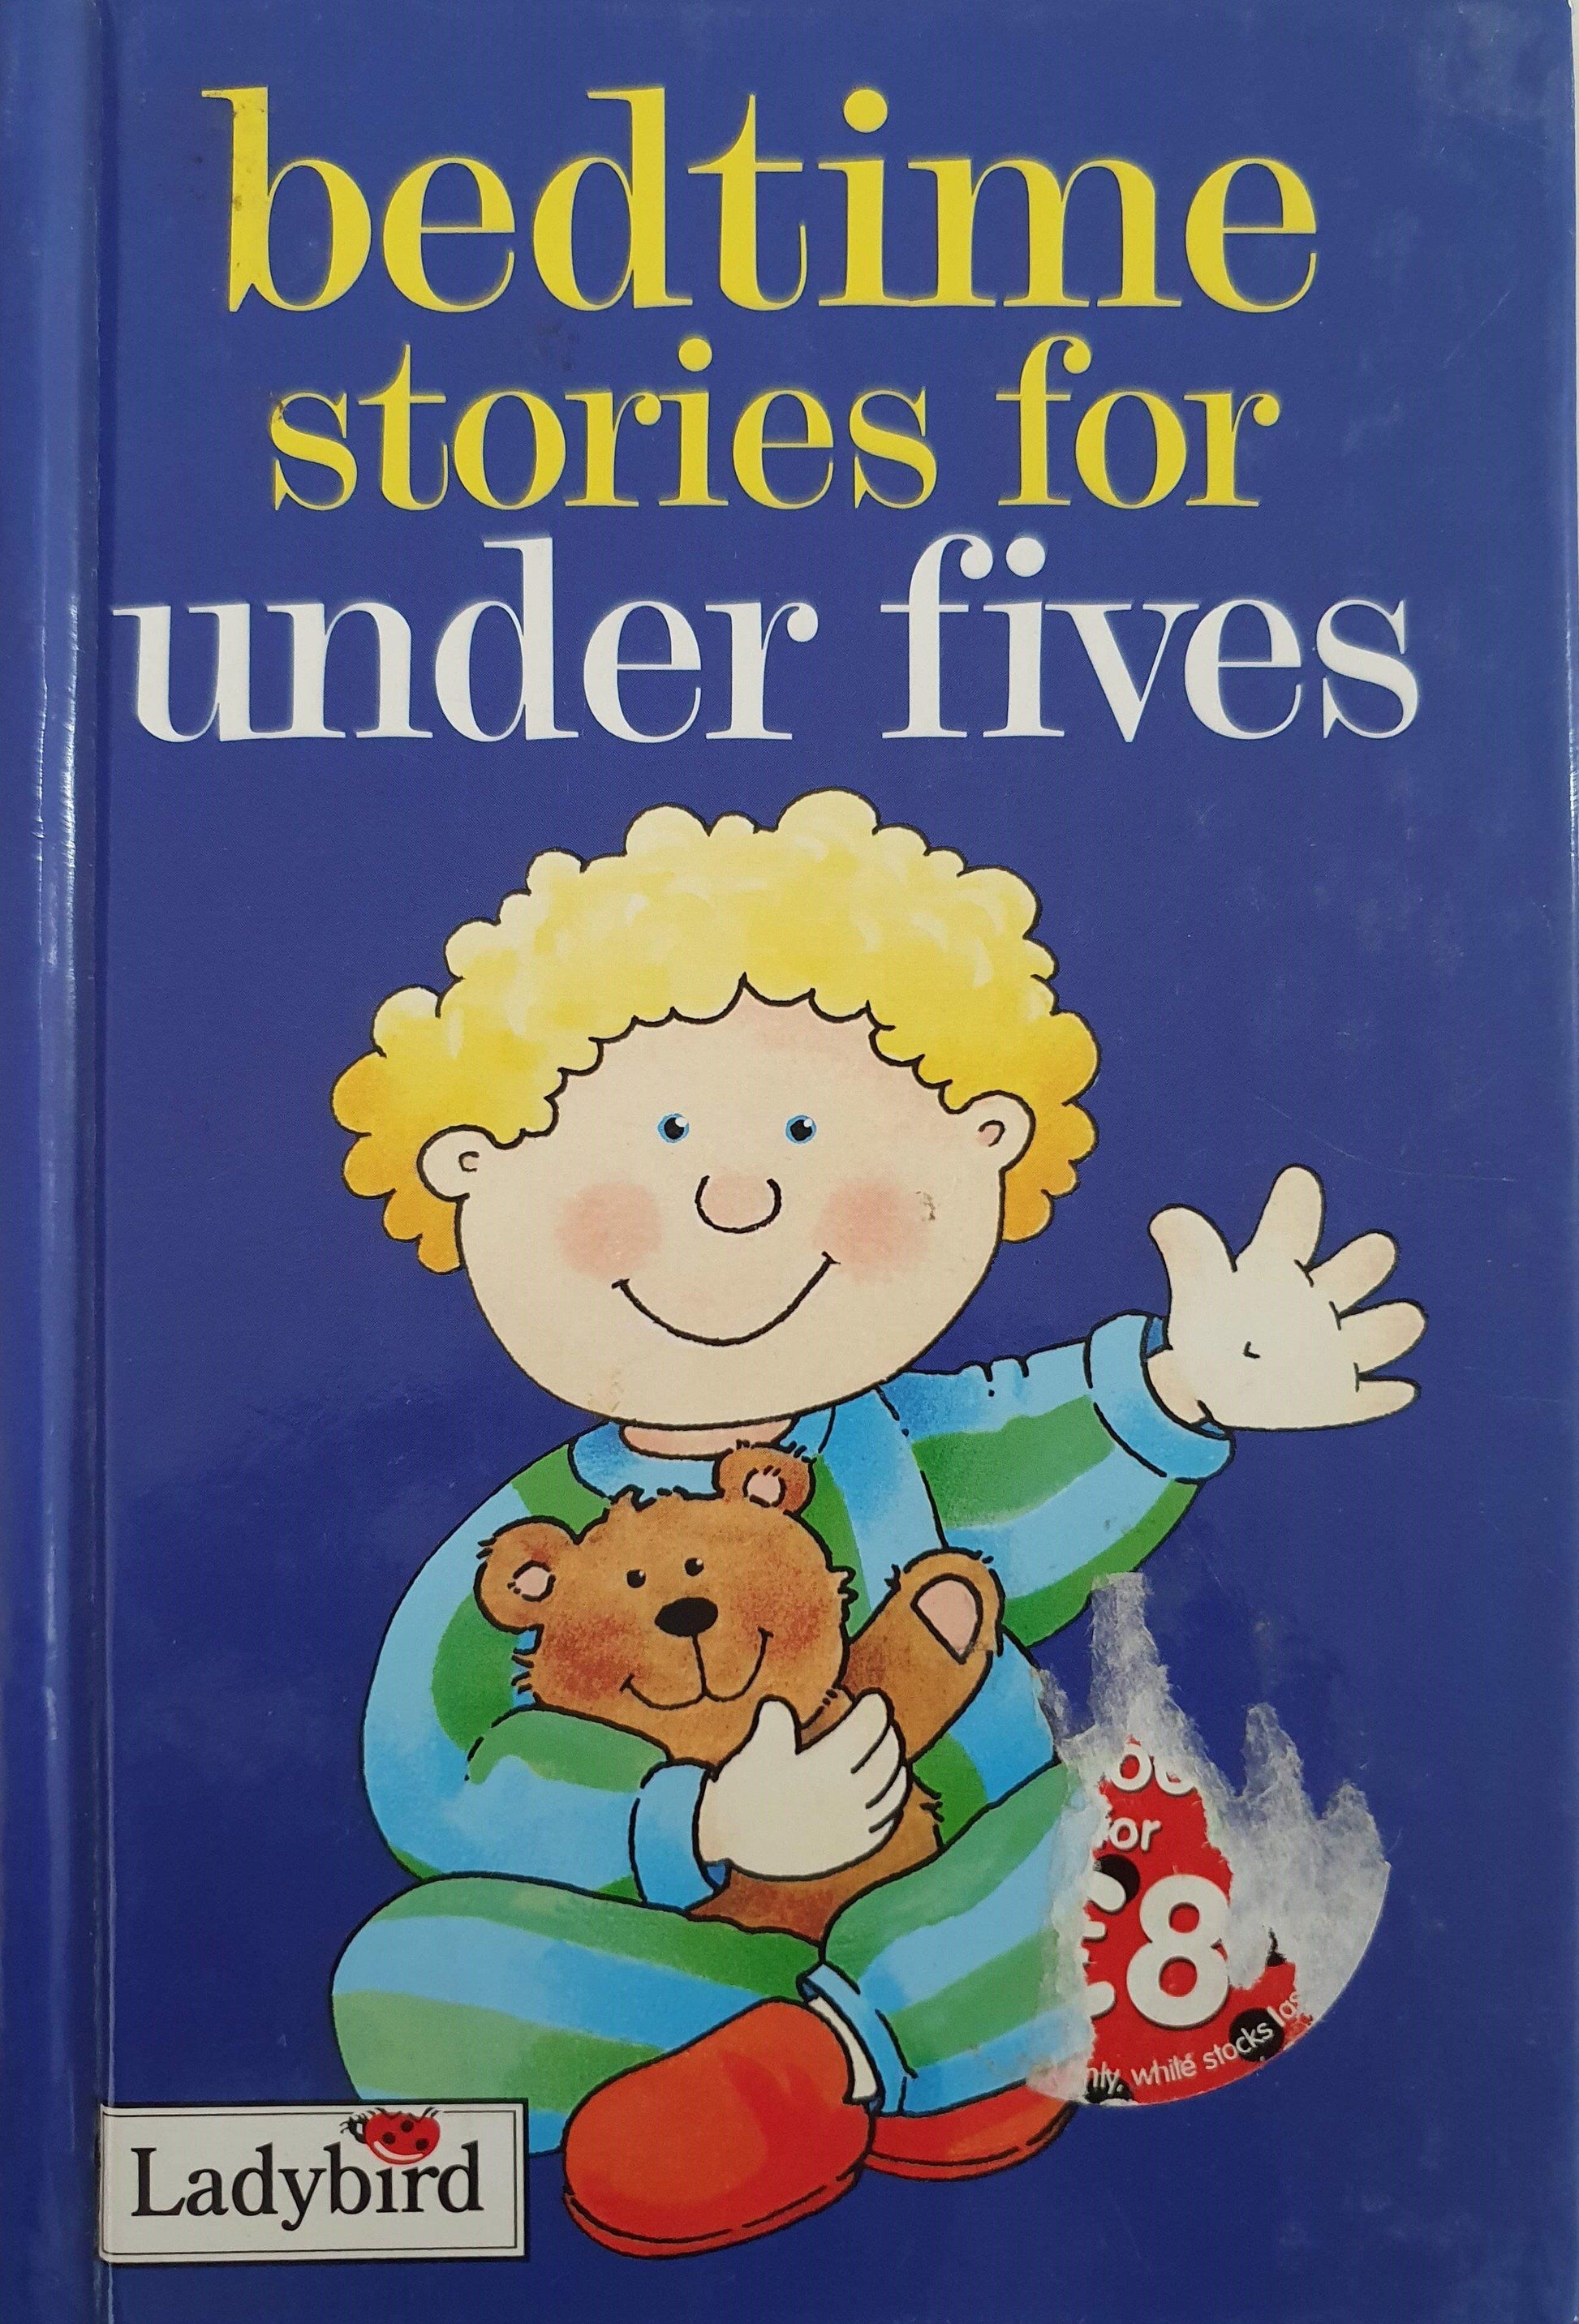 Bedtime stories for under fives Like New Ladybird  (6059216961721)